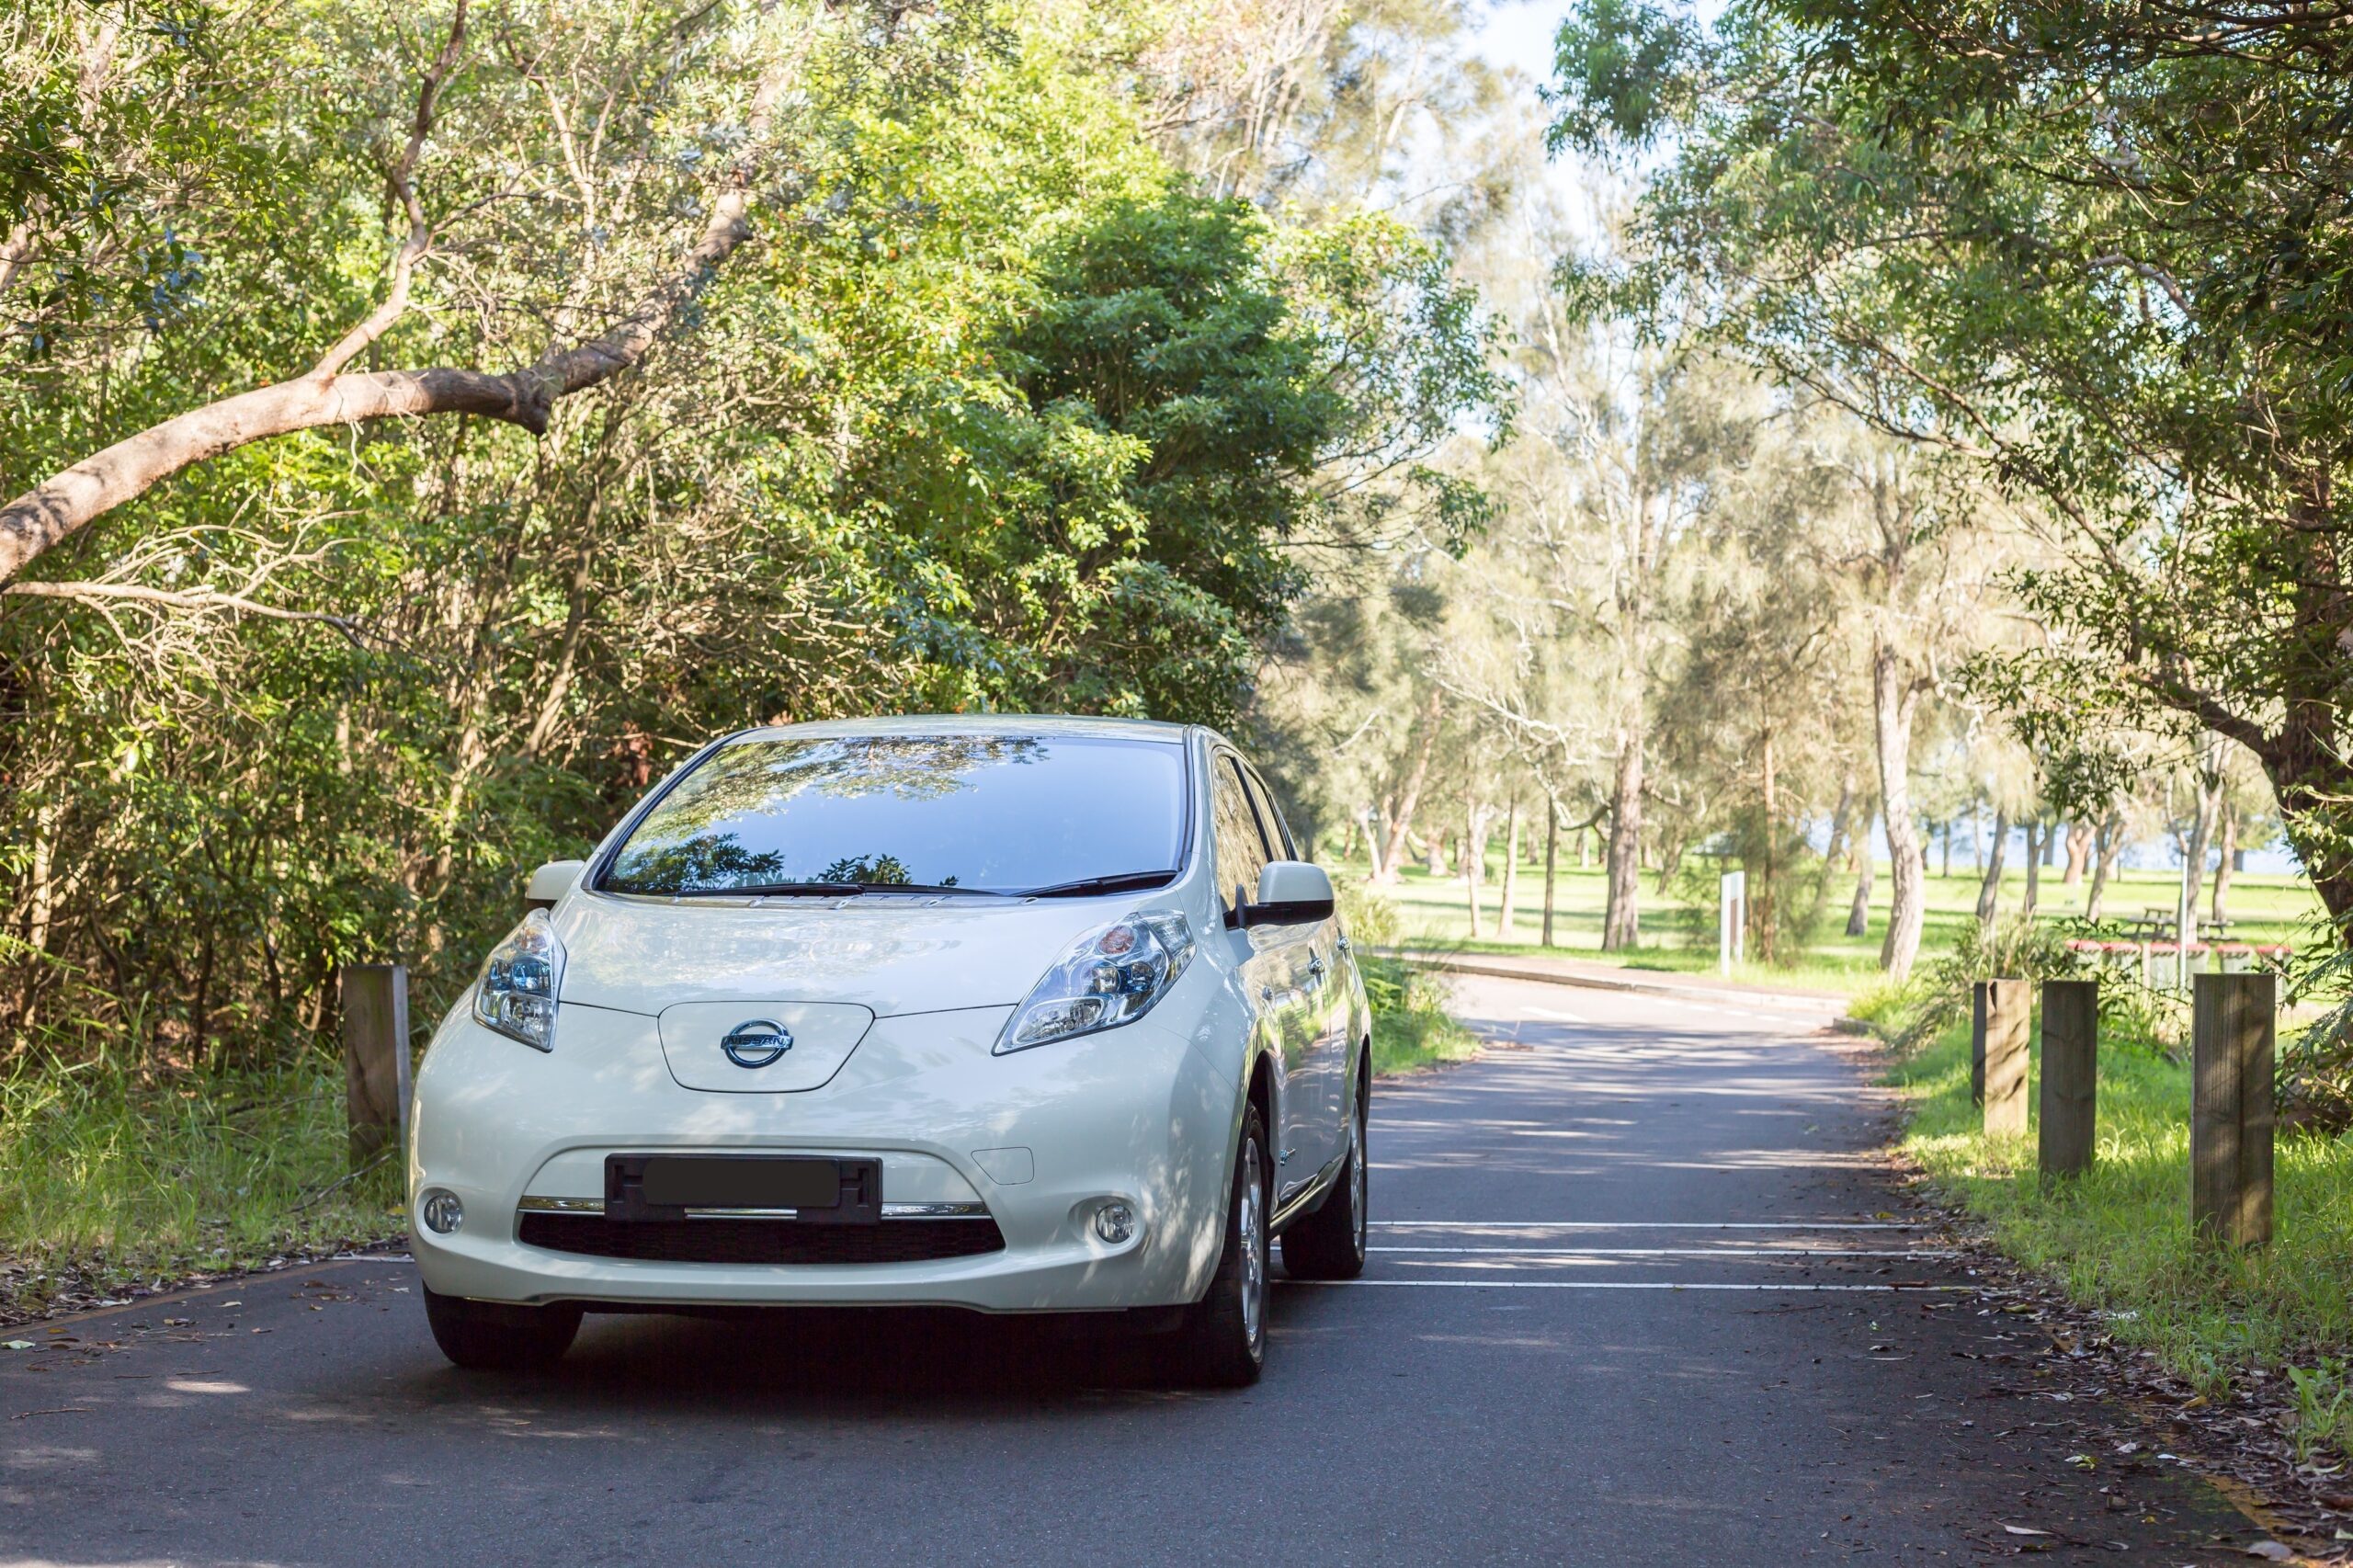 Nissan Leaf front view